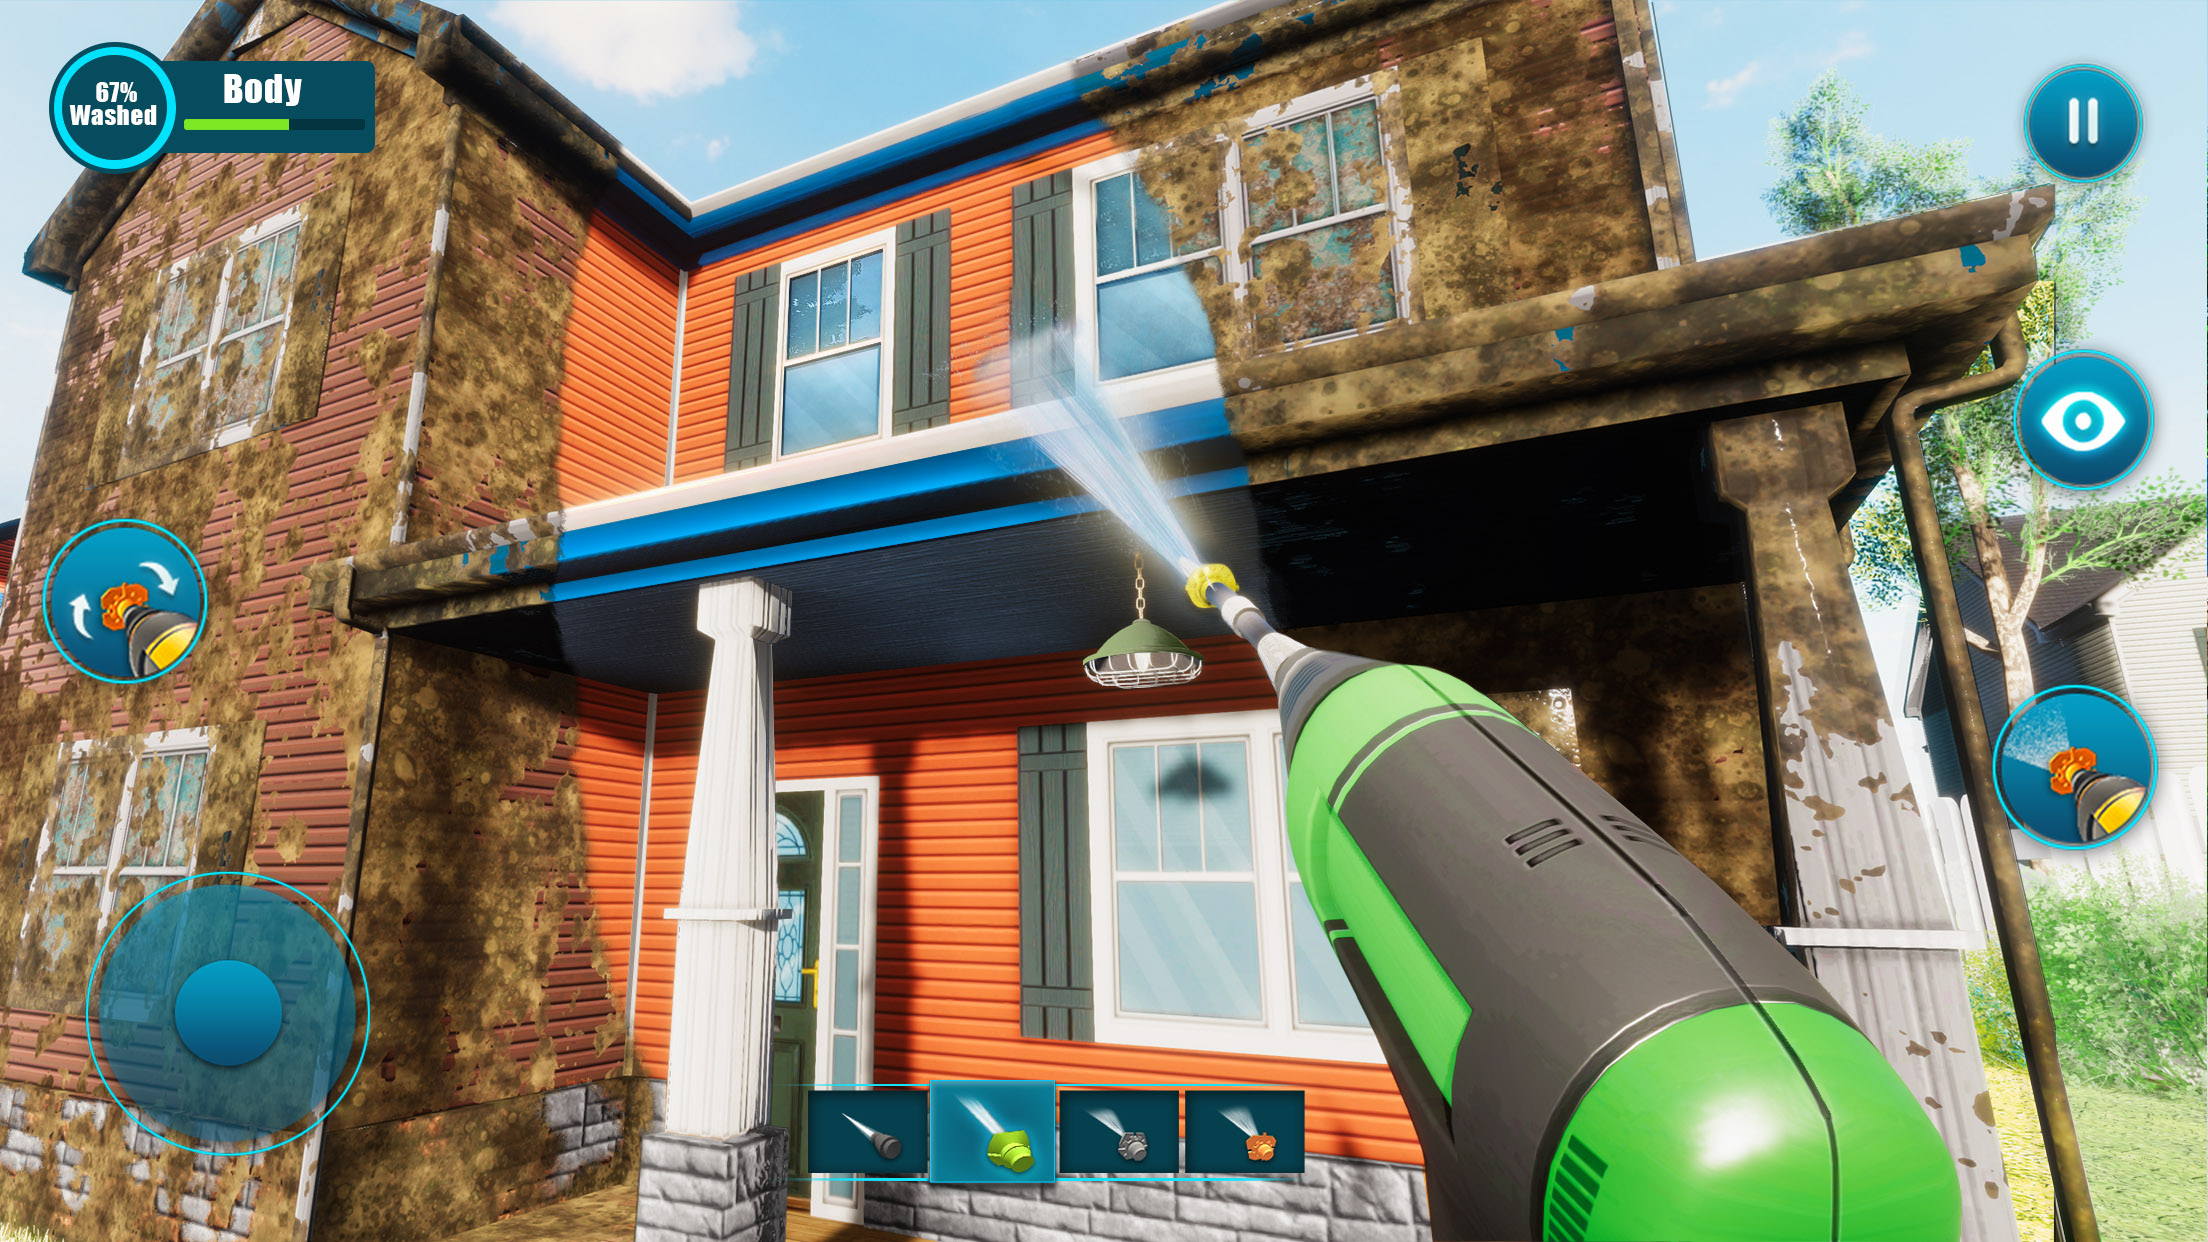 powerwash-simulator-how-to-play-multiplayer-and-use-room-codes-the-golden-news